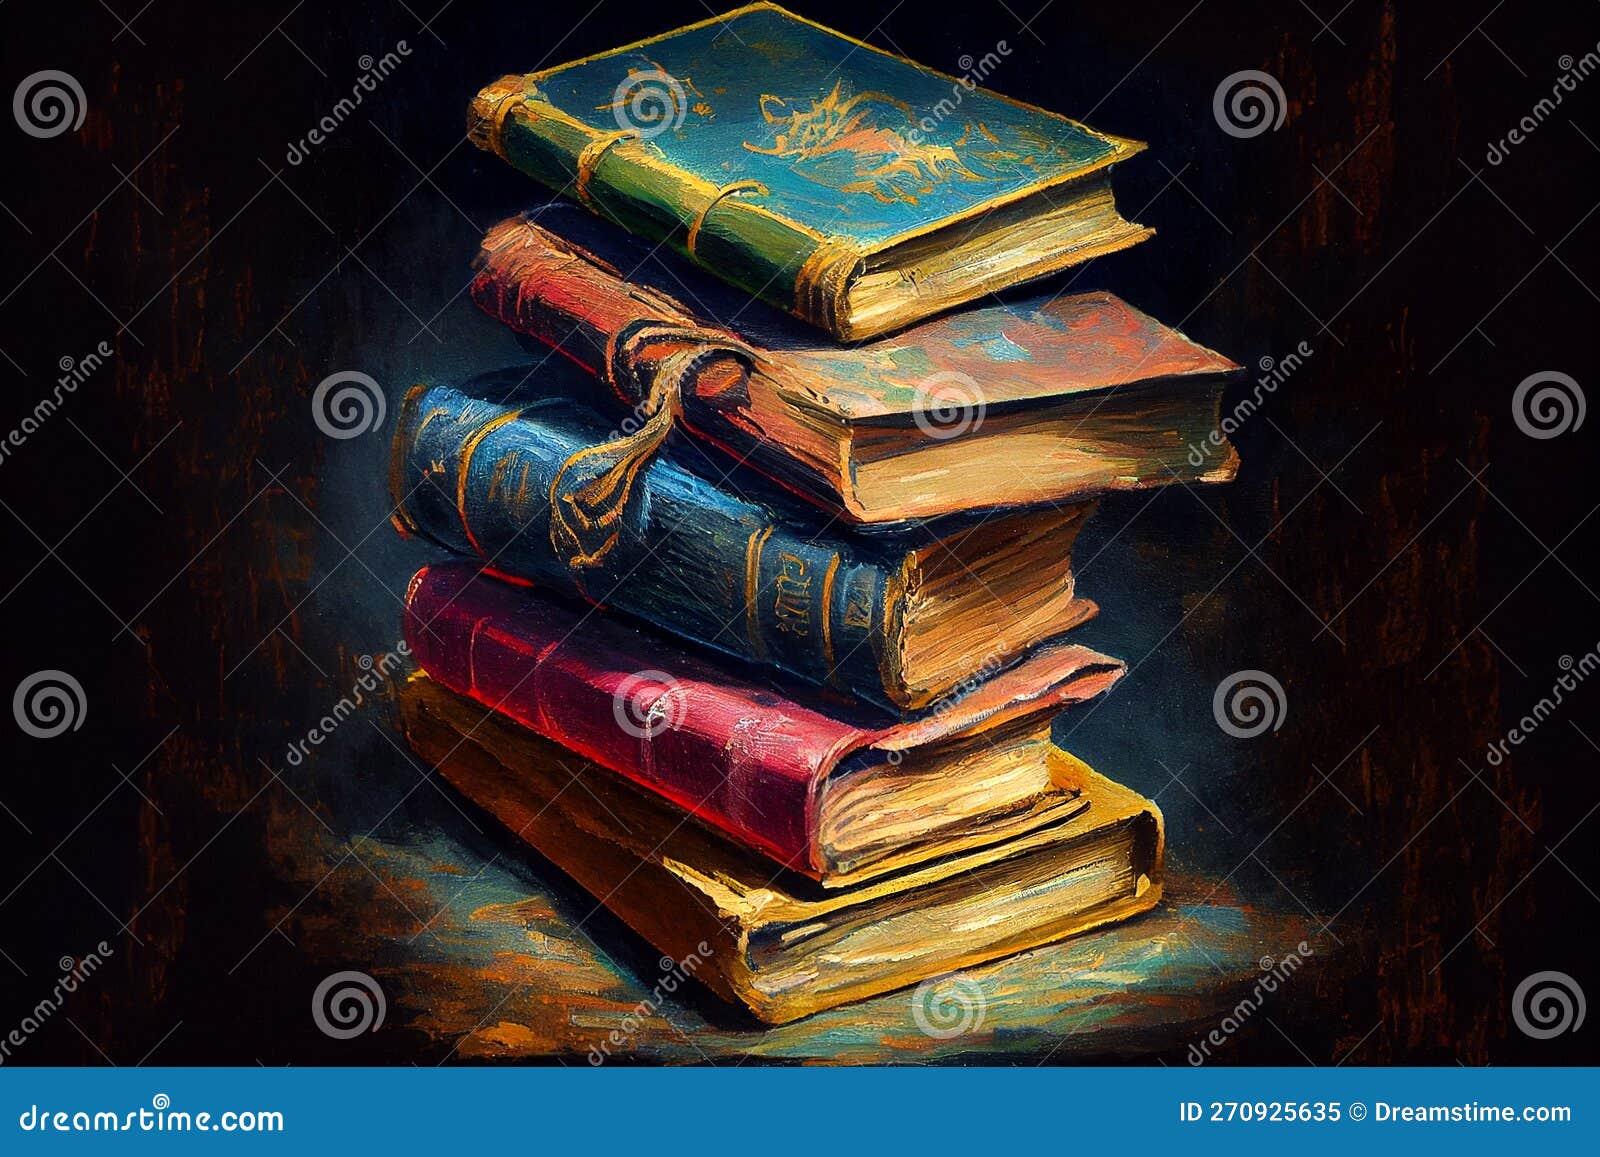 Book Read Oil Painting Stock Illustrations – 18 Book Read Oil